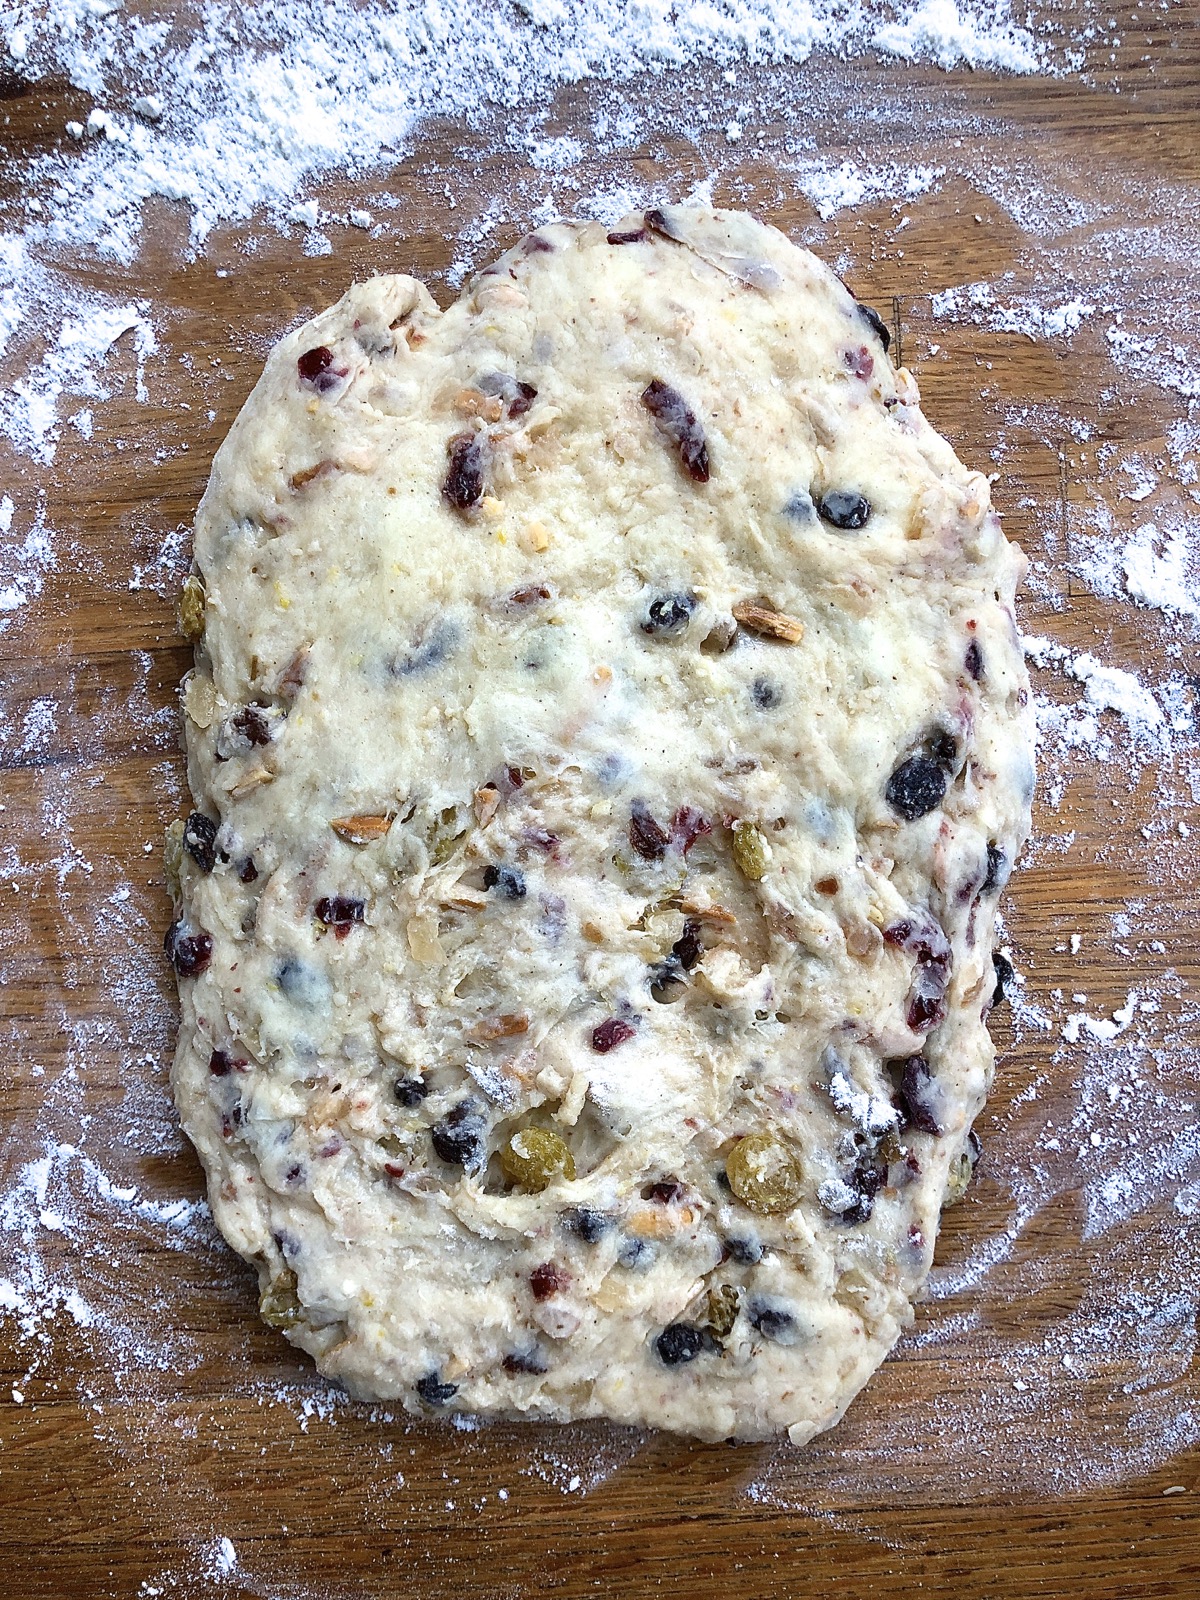 Stollen dough shaped into a flattened 8" x 6" oval.